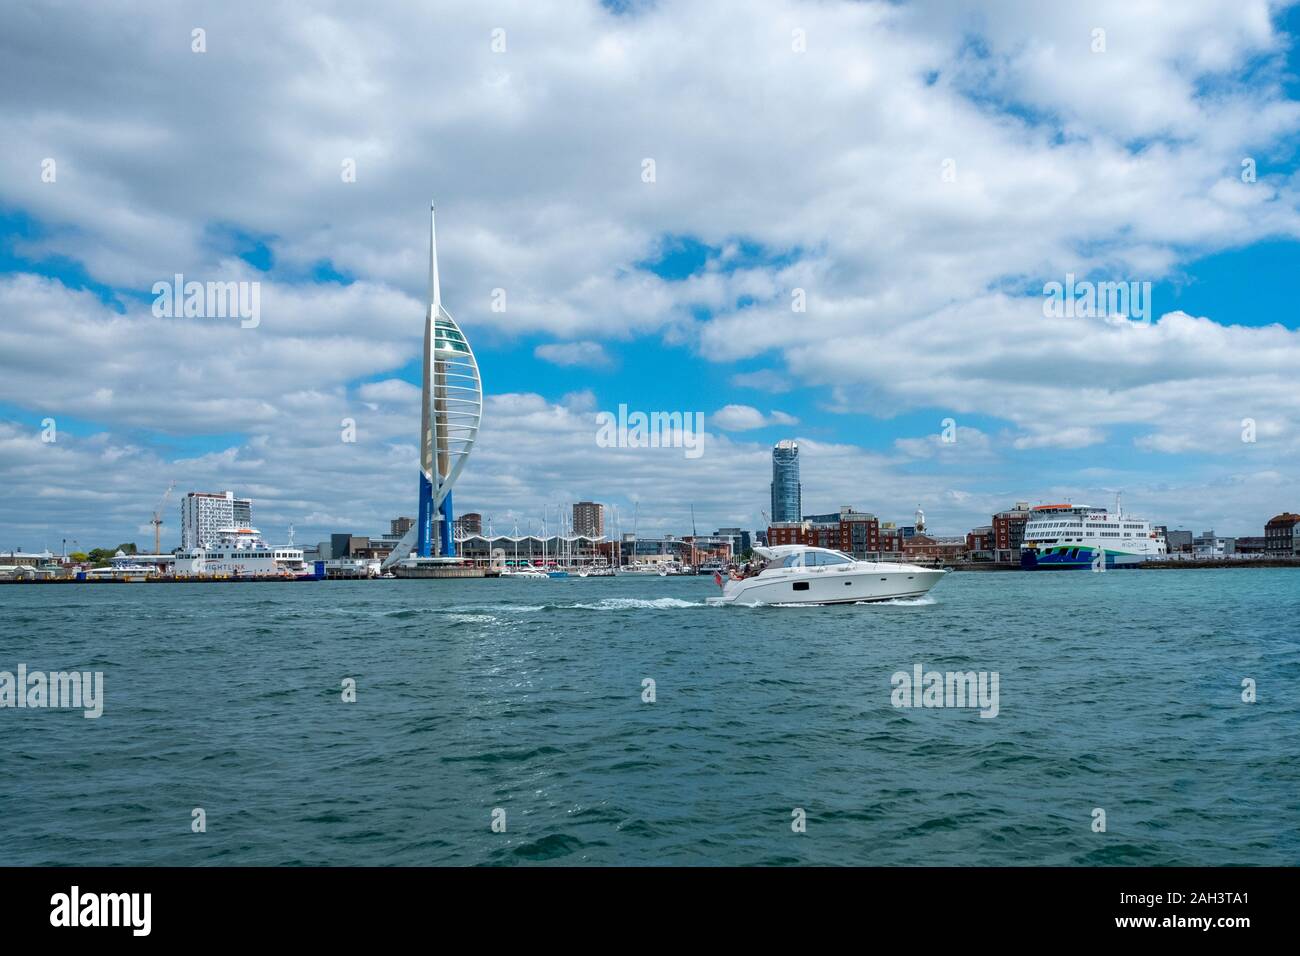 A power boat moves past the  Emirates Spinnaker Tower overlooking Portsmouth Harbour. The tower is 170m tall and has a viewing deck Stock Photo